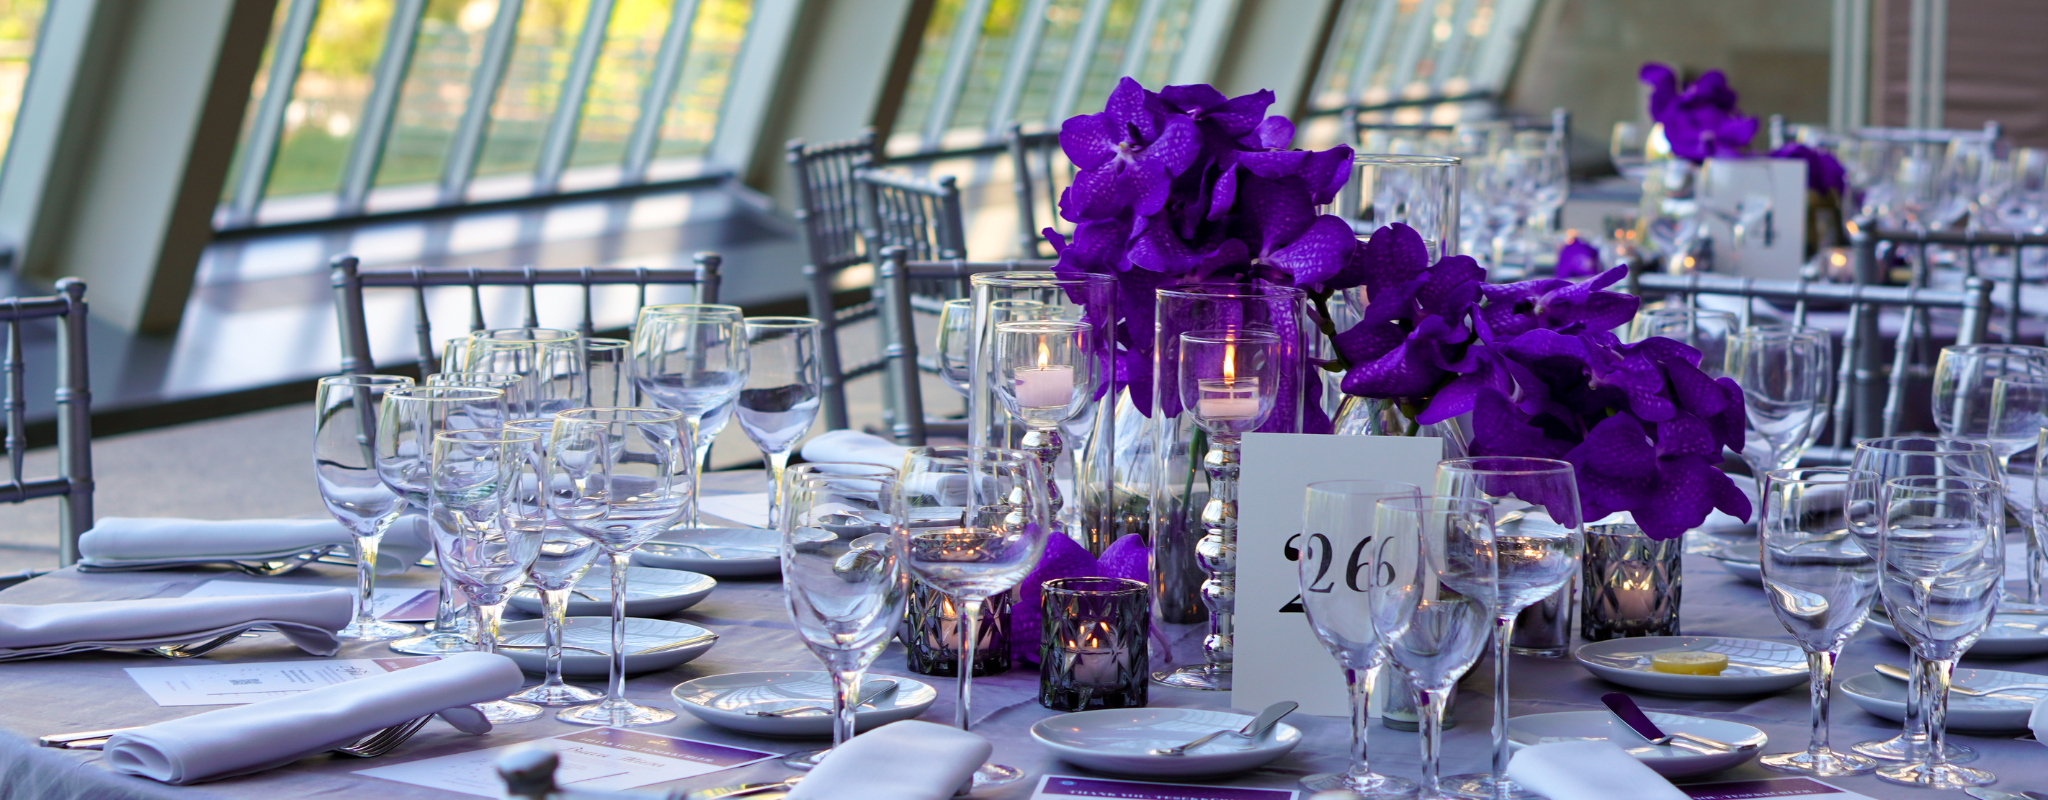 event table setting